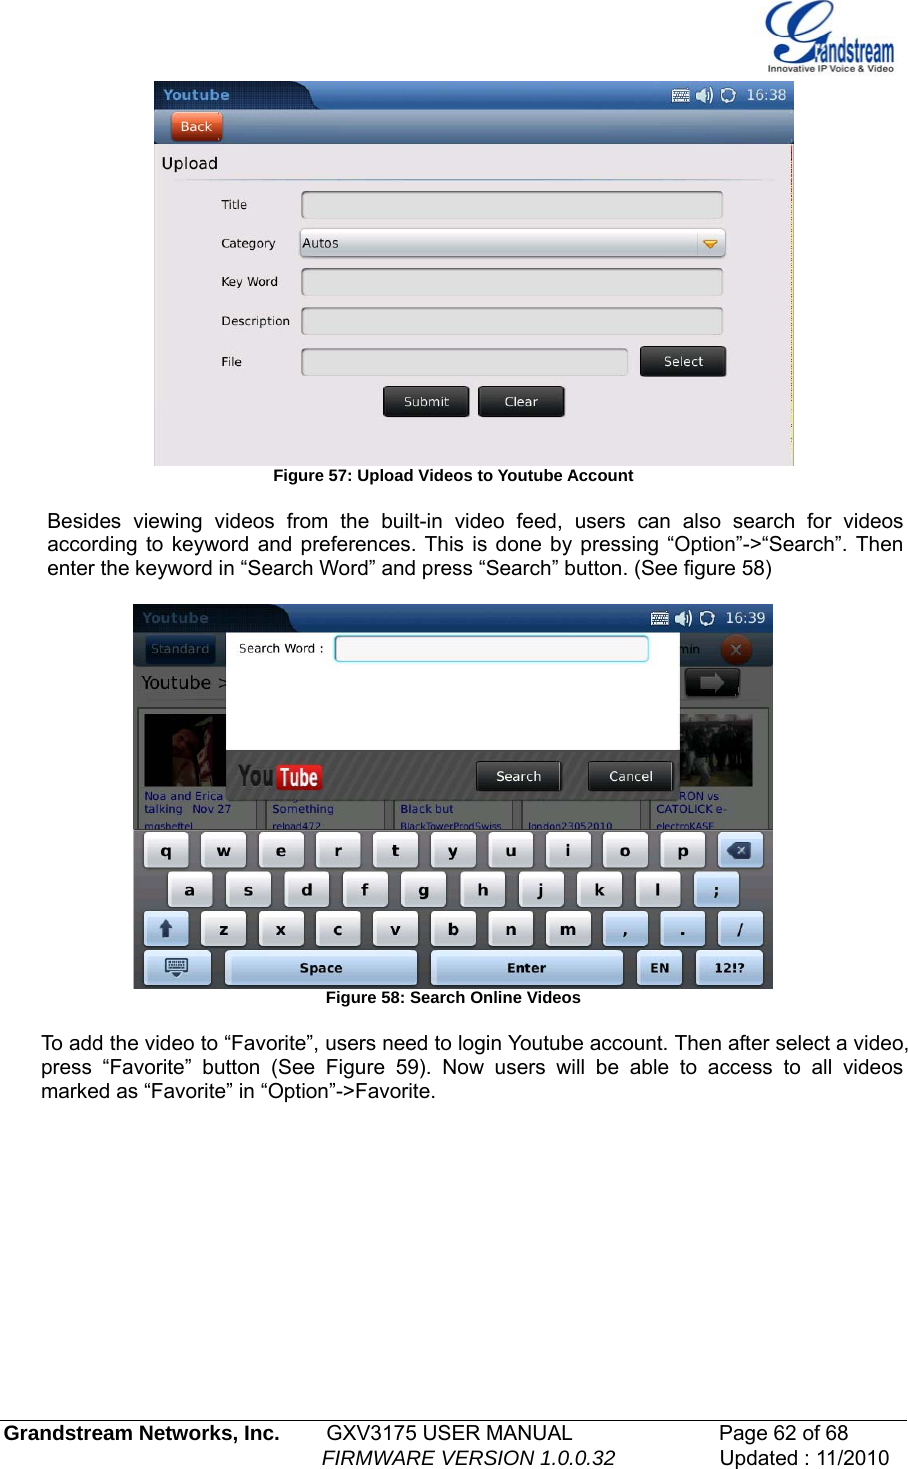         Figure 57: Upload Videos to Youtube Account  Besides viewing videos from the built-in video feed, users can also search for videos according to keyword and preferences. This is done by pressing “Option”-&gt;“Search”. Then enter the keyword in “Search Word” and press “Search” button. (See figure 58)   Figure 58: Search Online Videos  To add the video to “Favorite”, users need to login Youtube account. Then after select a video, press “Favorite” button (See Figure 59). Now users will be able to access to all videos marked as “Favorite” in “Option”-&gt;Favorite. Grandstream Networks, Inc.        GXV3175 USER MANUAL                      Page 62 of 68                                                        FIRMWARE VERSION 1.0.0.32                  Updated : 11/2010  